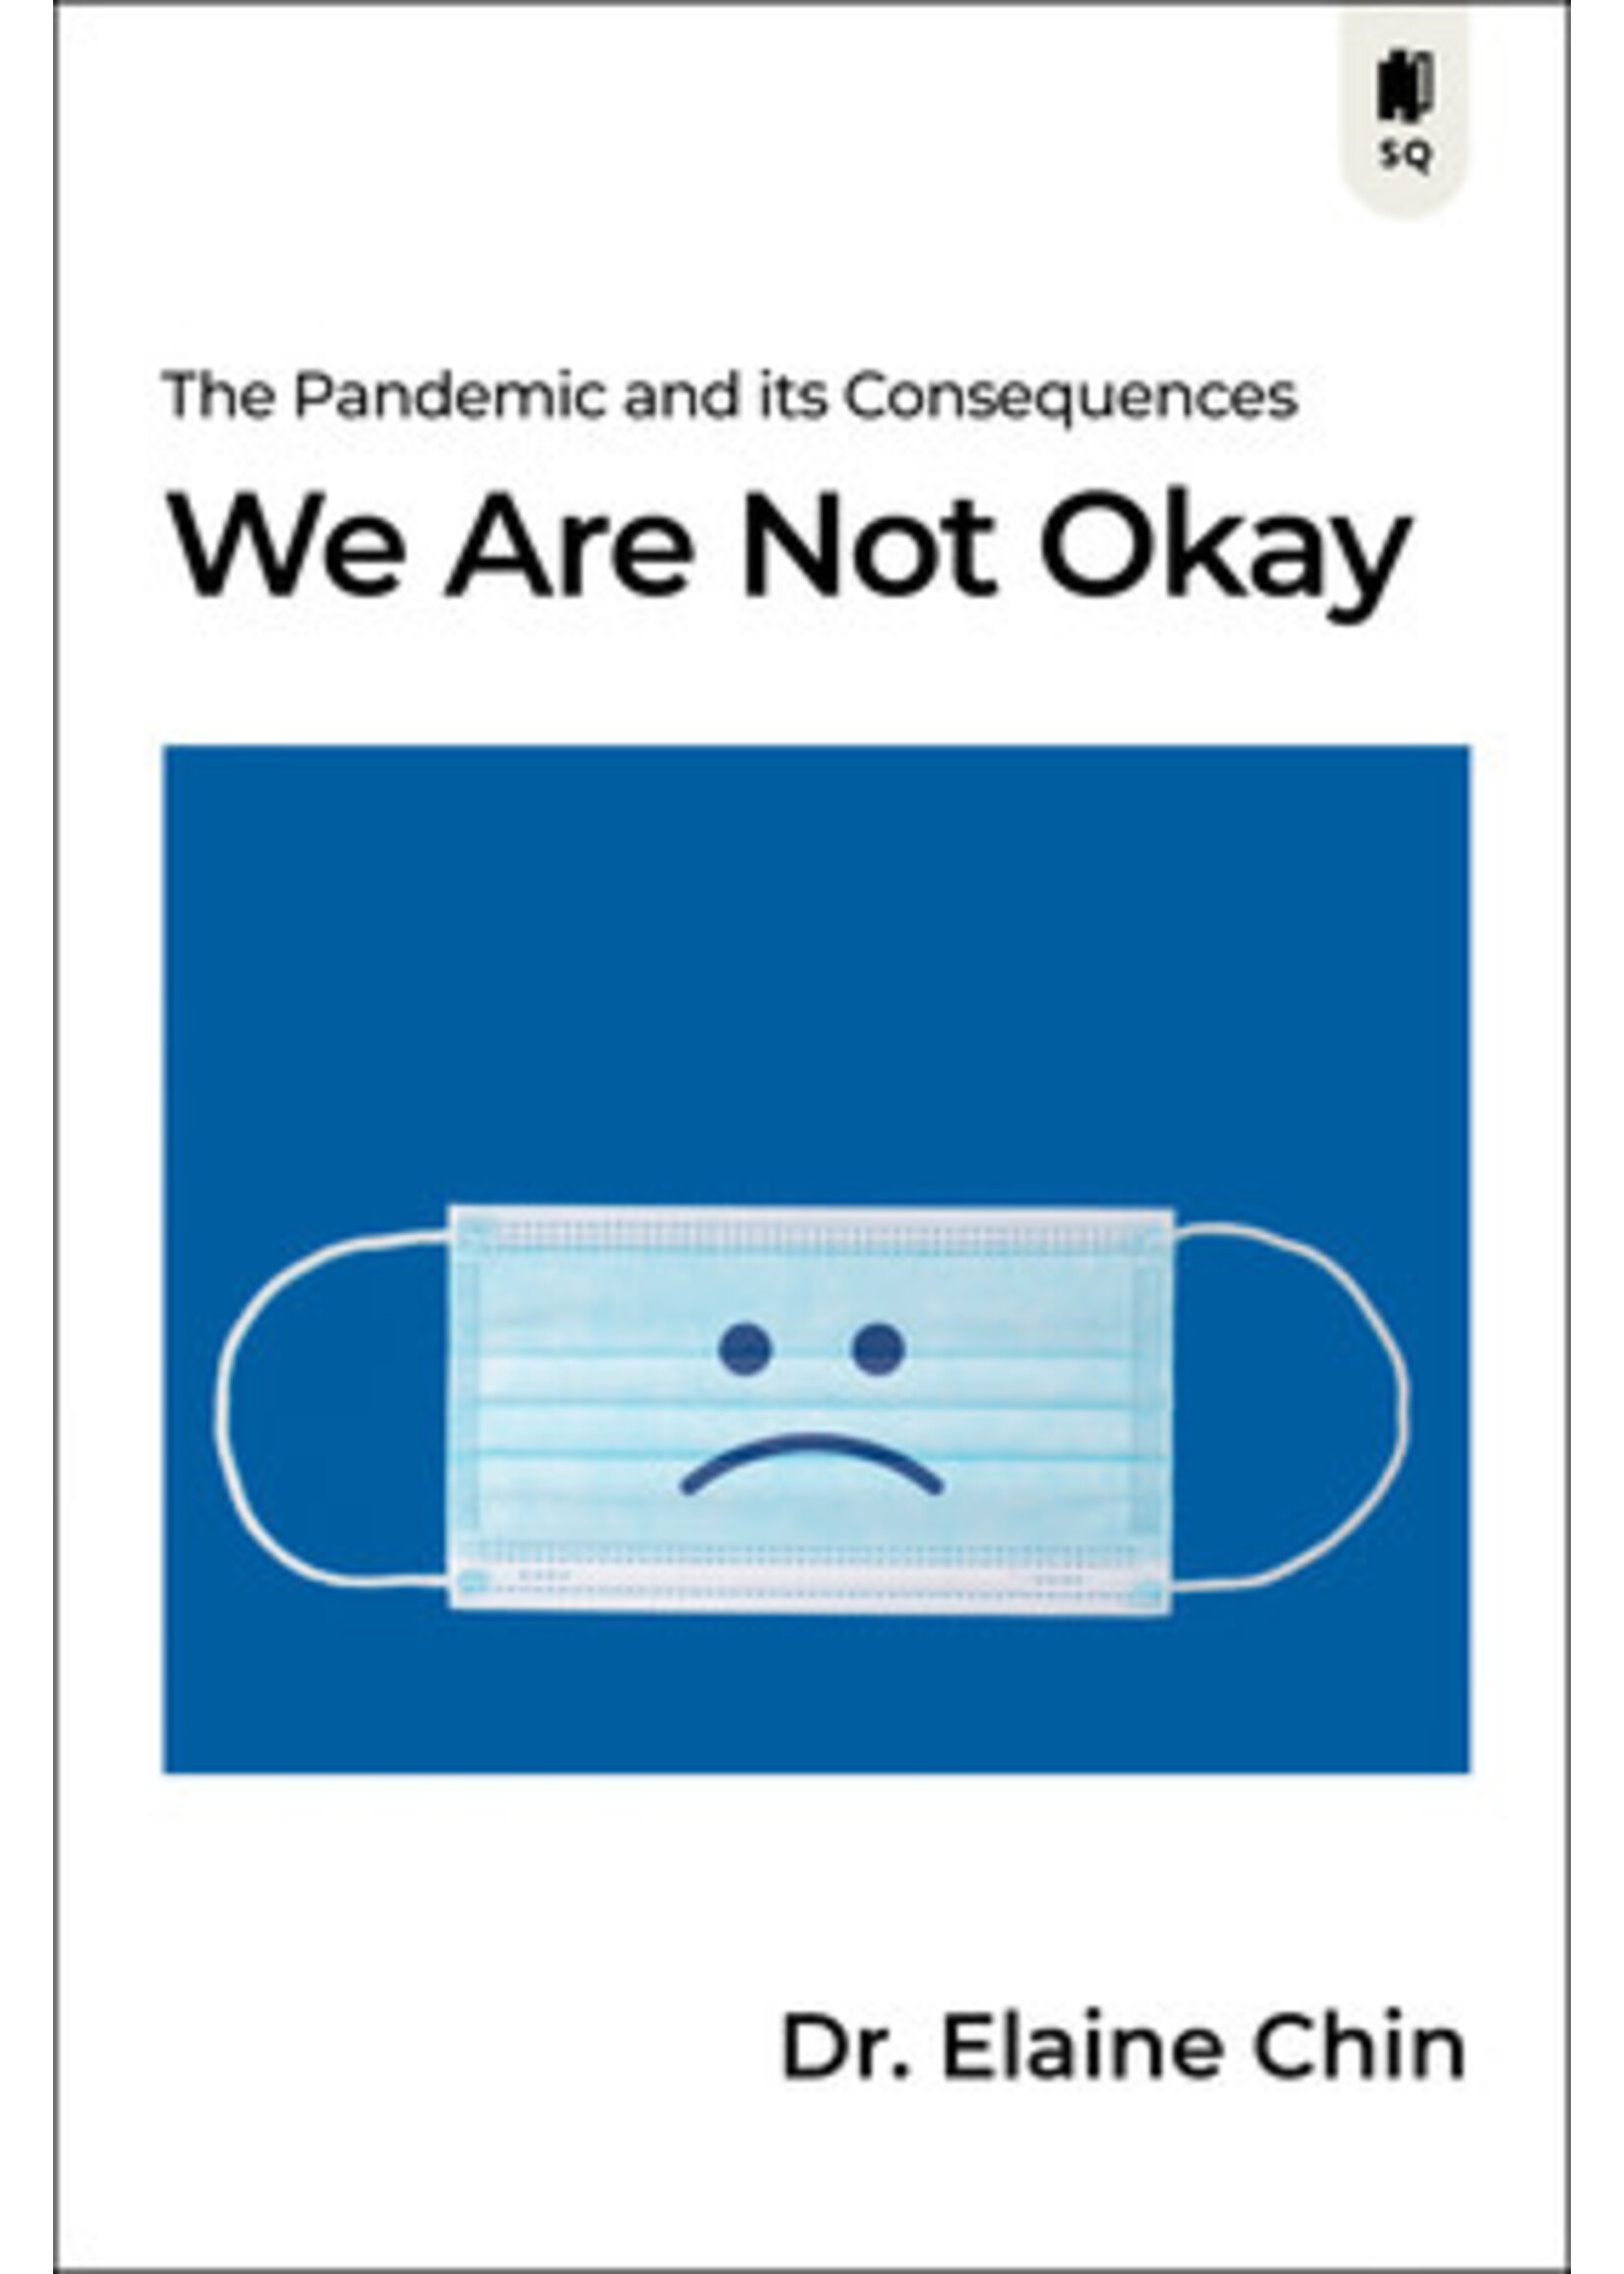 We Are Not Okay: The Pandemic and its Consequences by Dr Elaine Chin